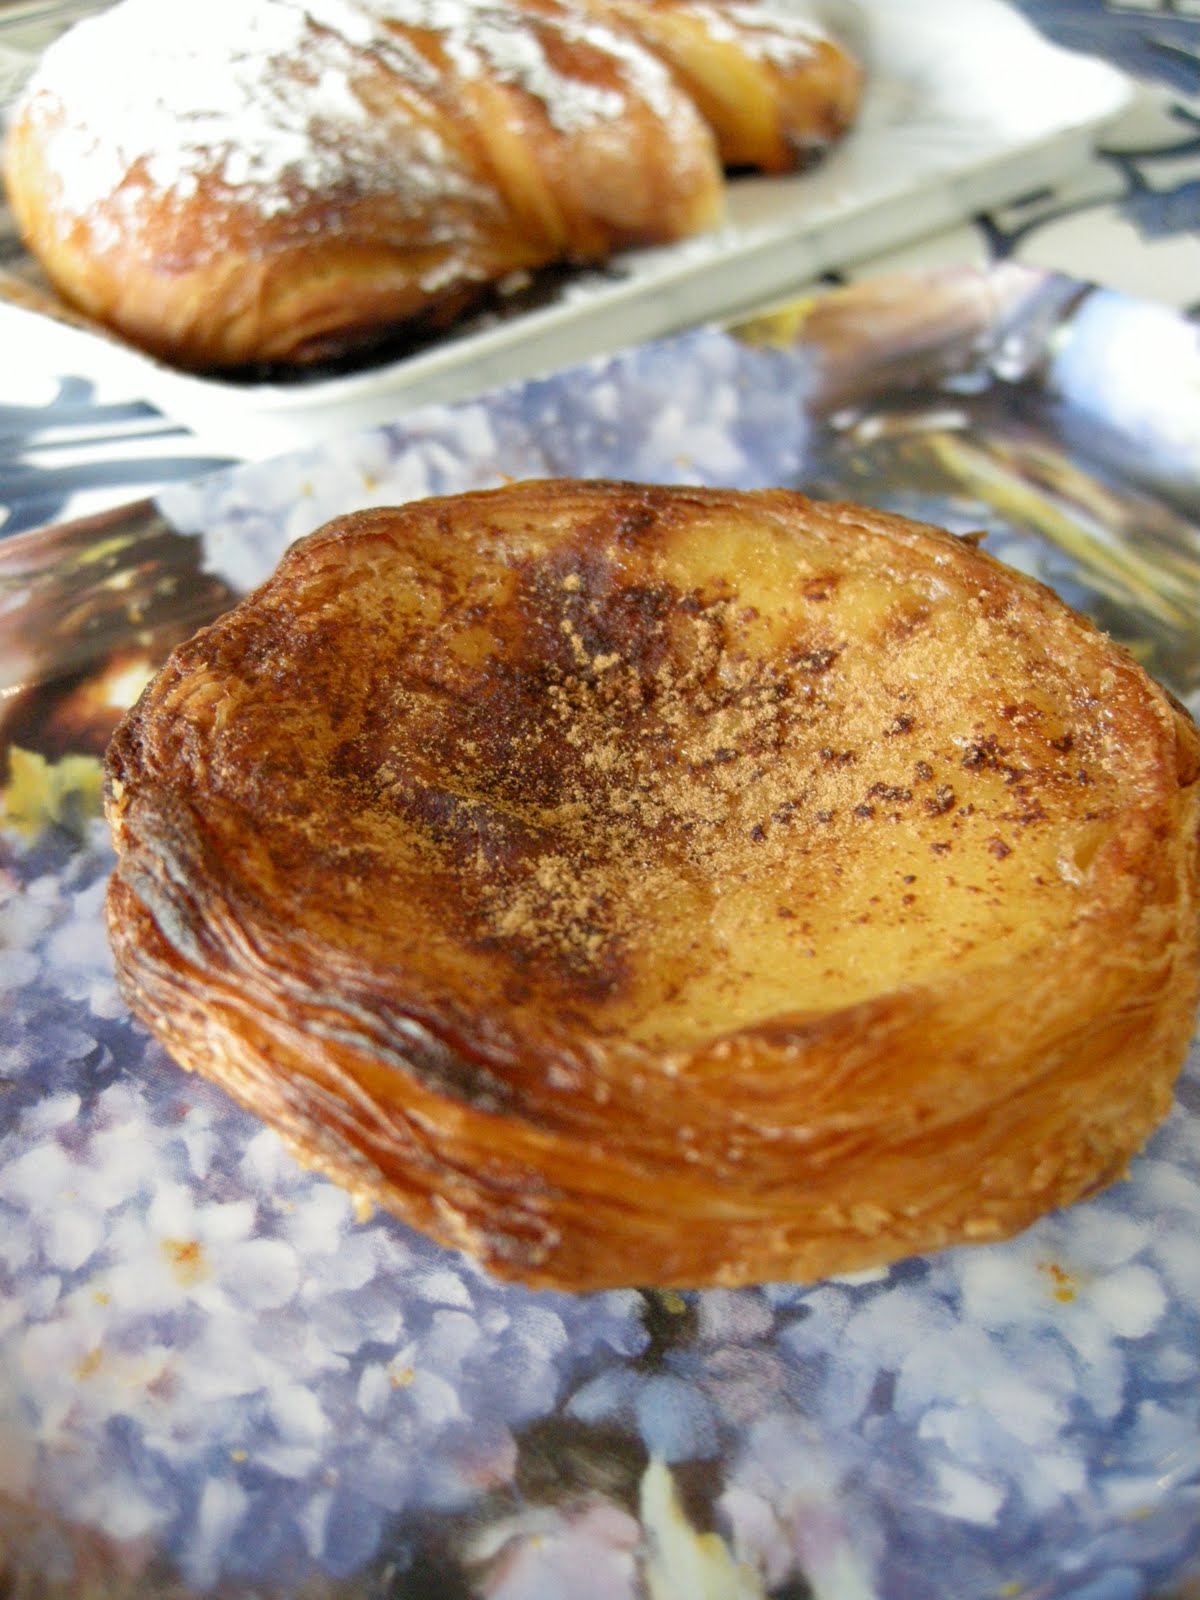 An Appetite For All Things Good: The Hunt for the Portuguese Egg Tart